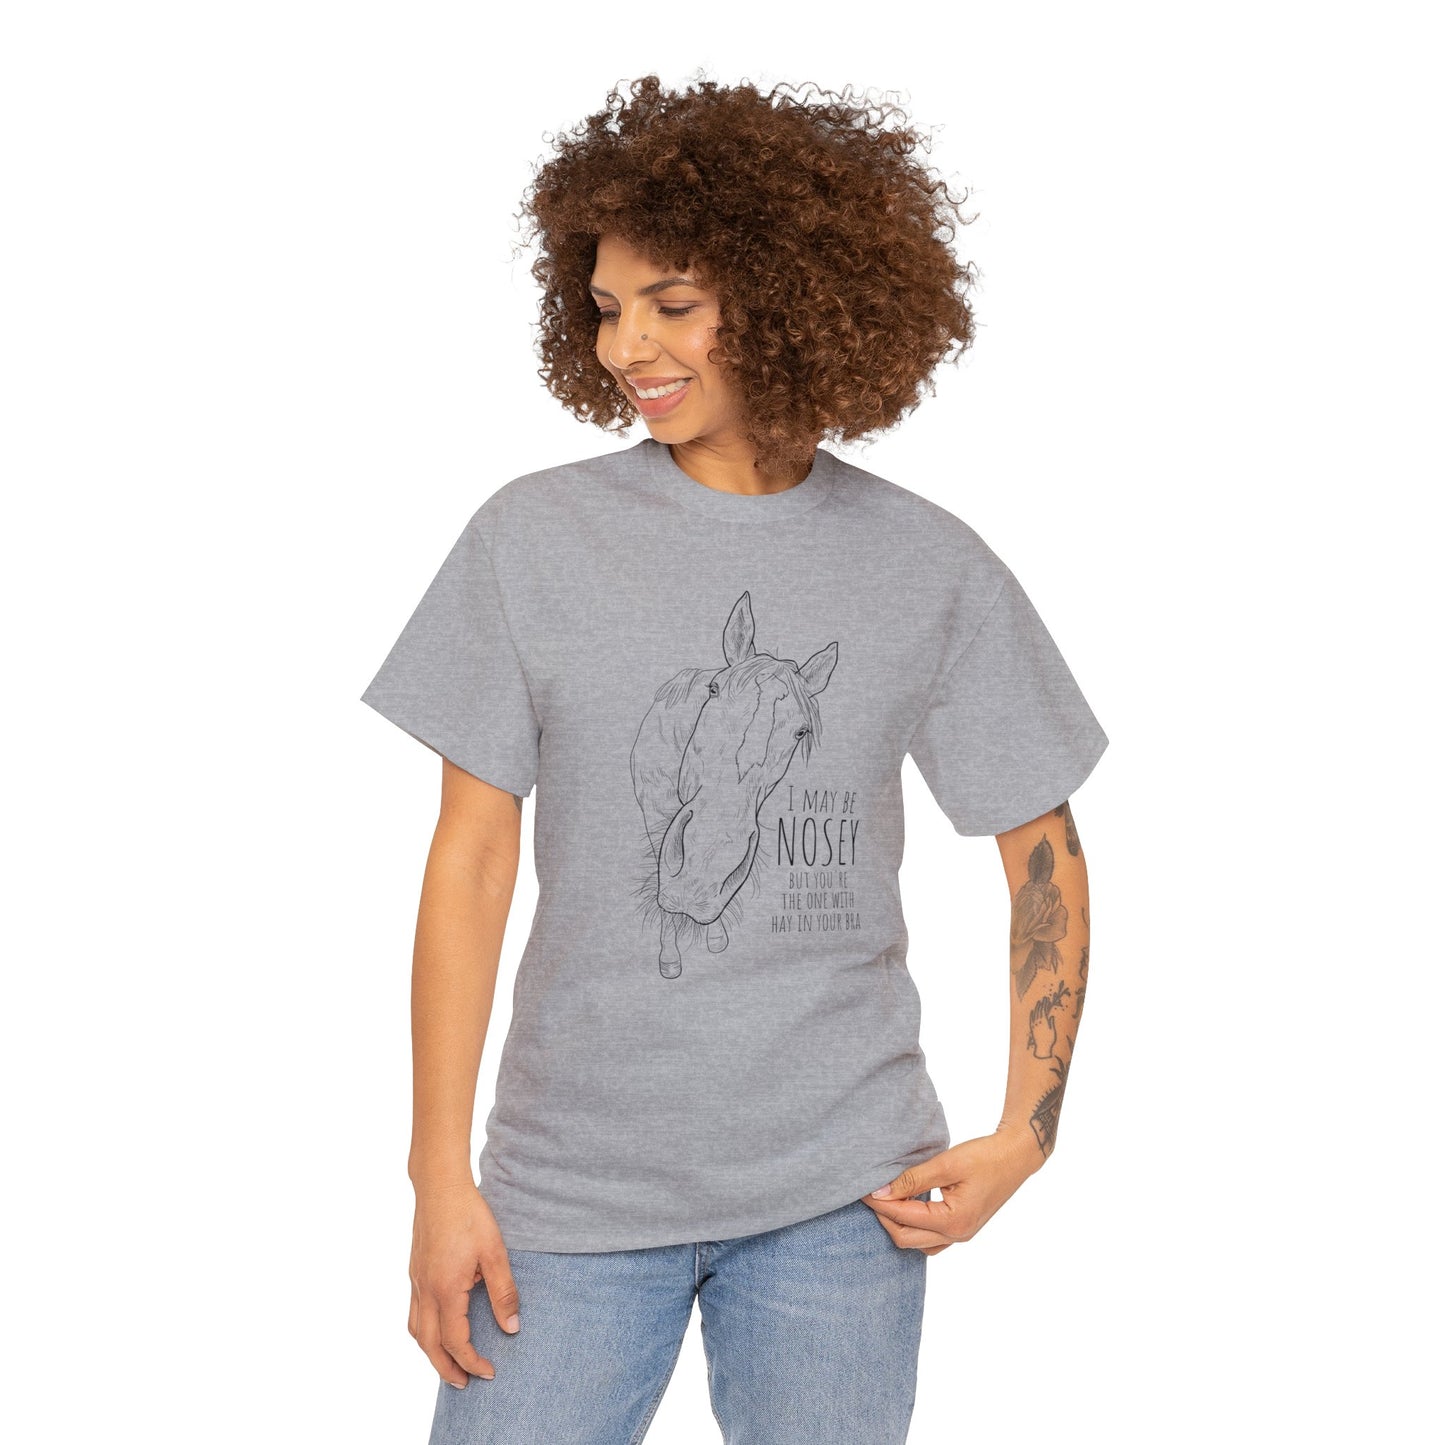 Jeezy - I May Be Nosey - Unisex Cotton Tee